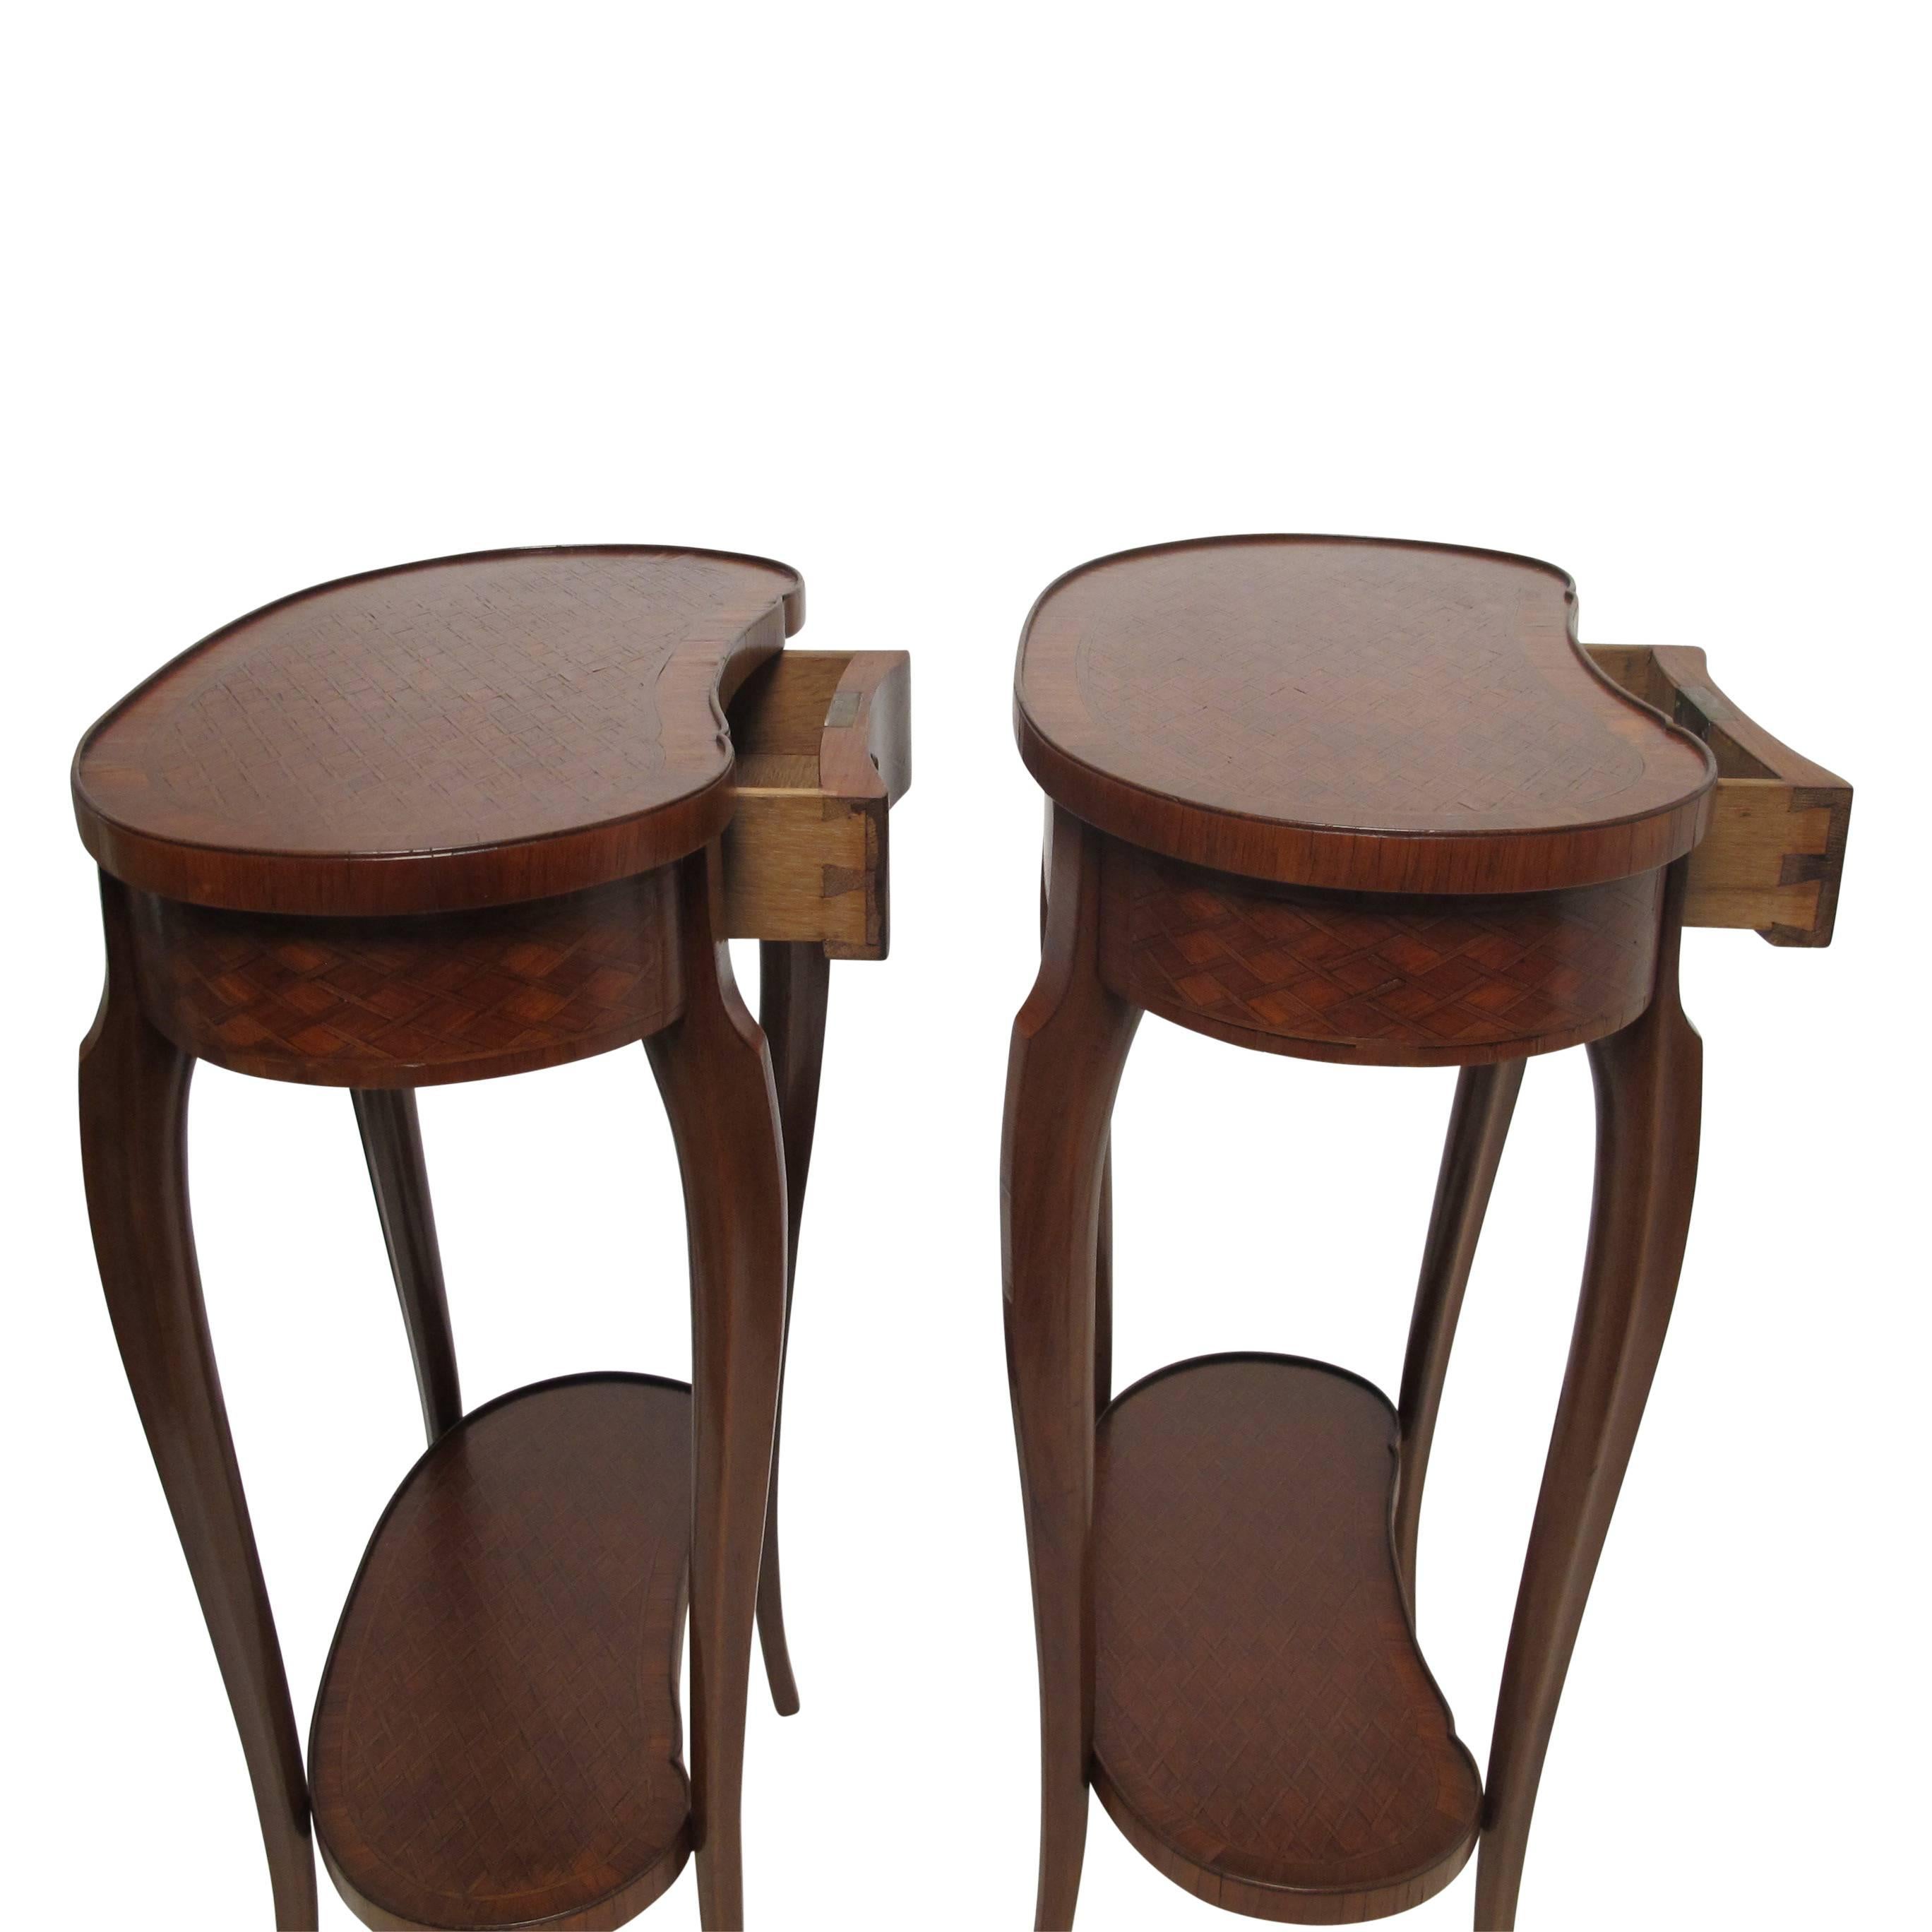 20th Century Pair of Mahogany Kidney Shape Parquetry Inlay Side Tables, French, circa 1900